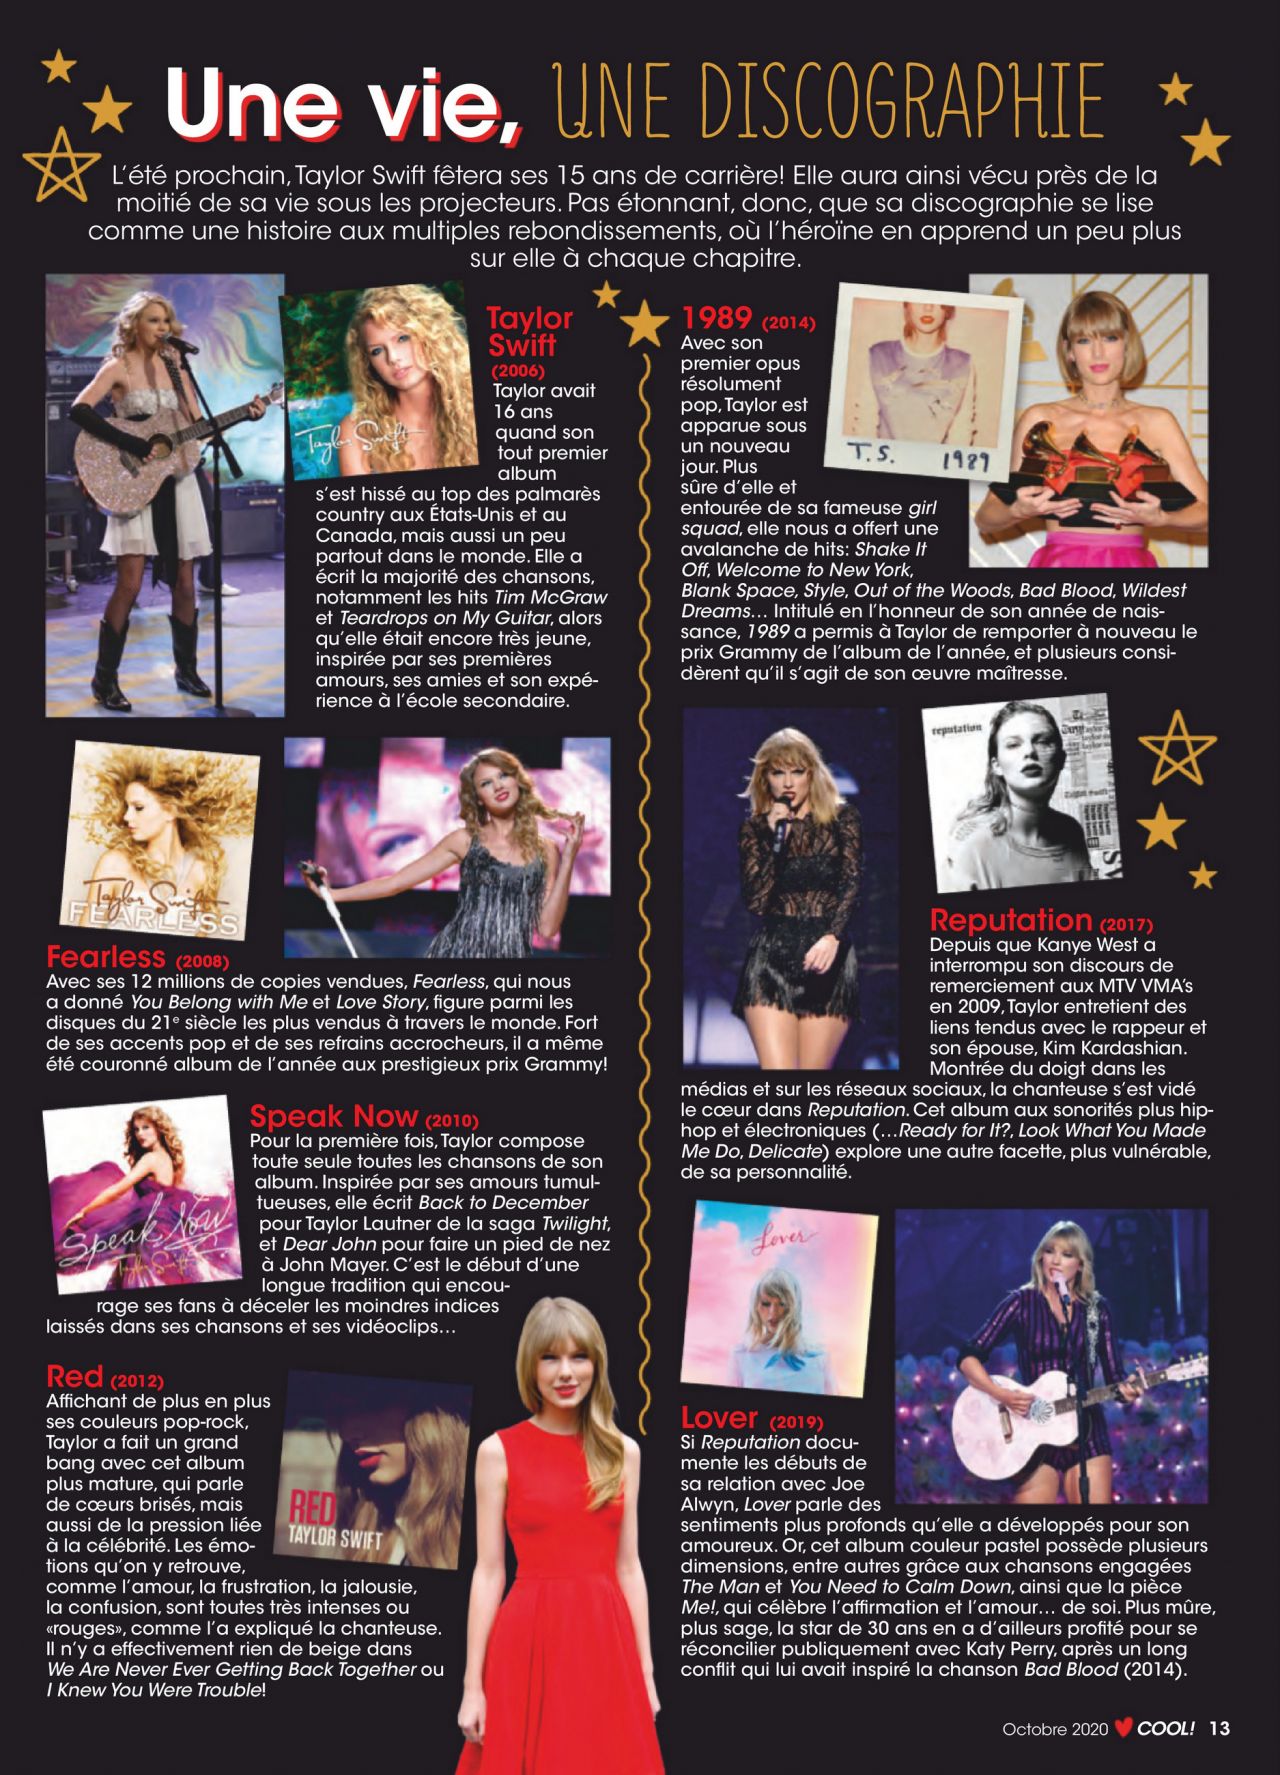 taylor-swift-cool-canada-october-2020-issue-4.jpg